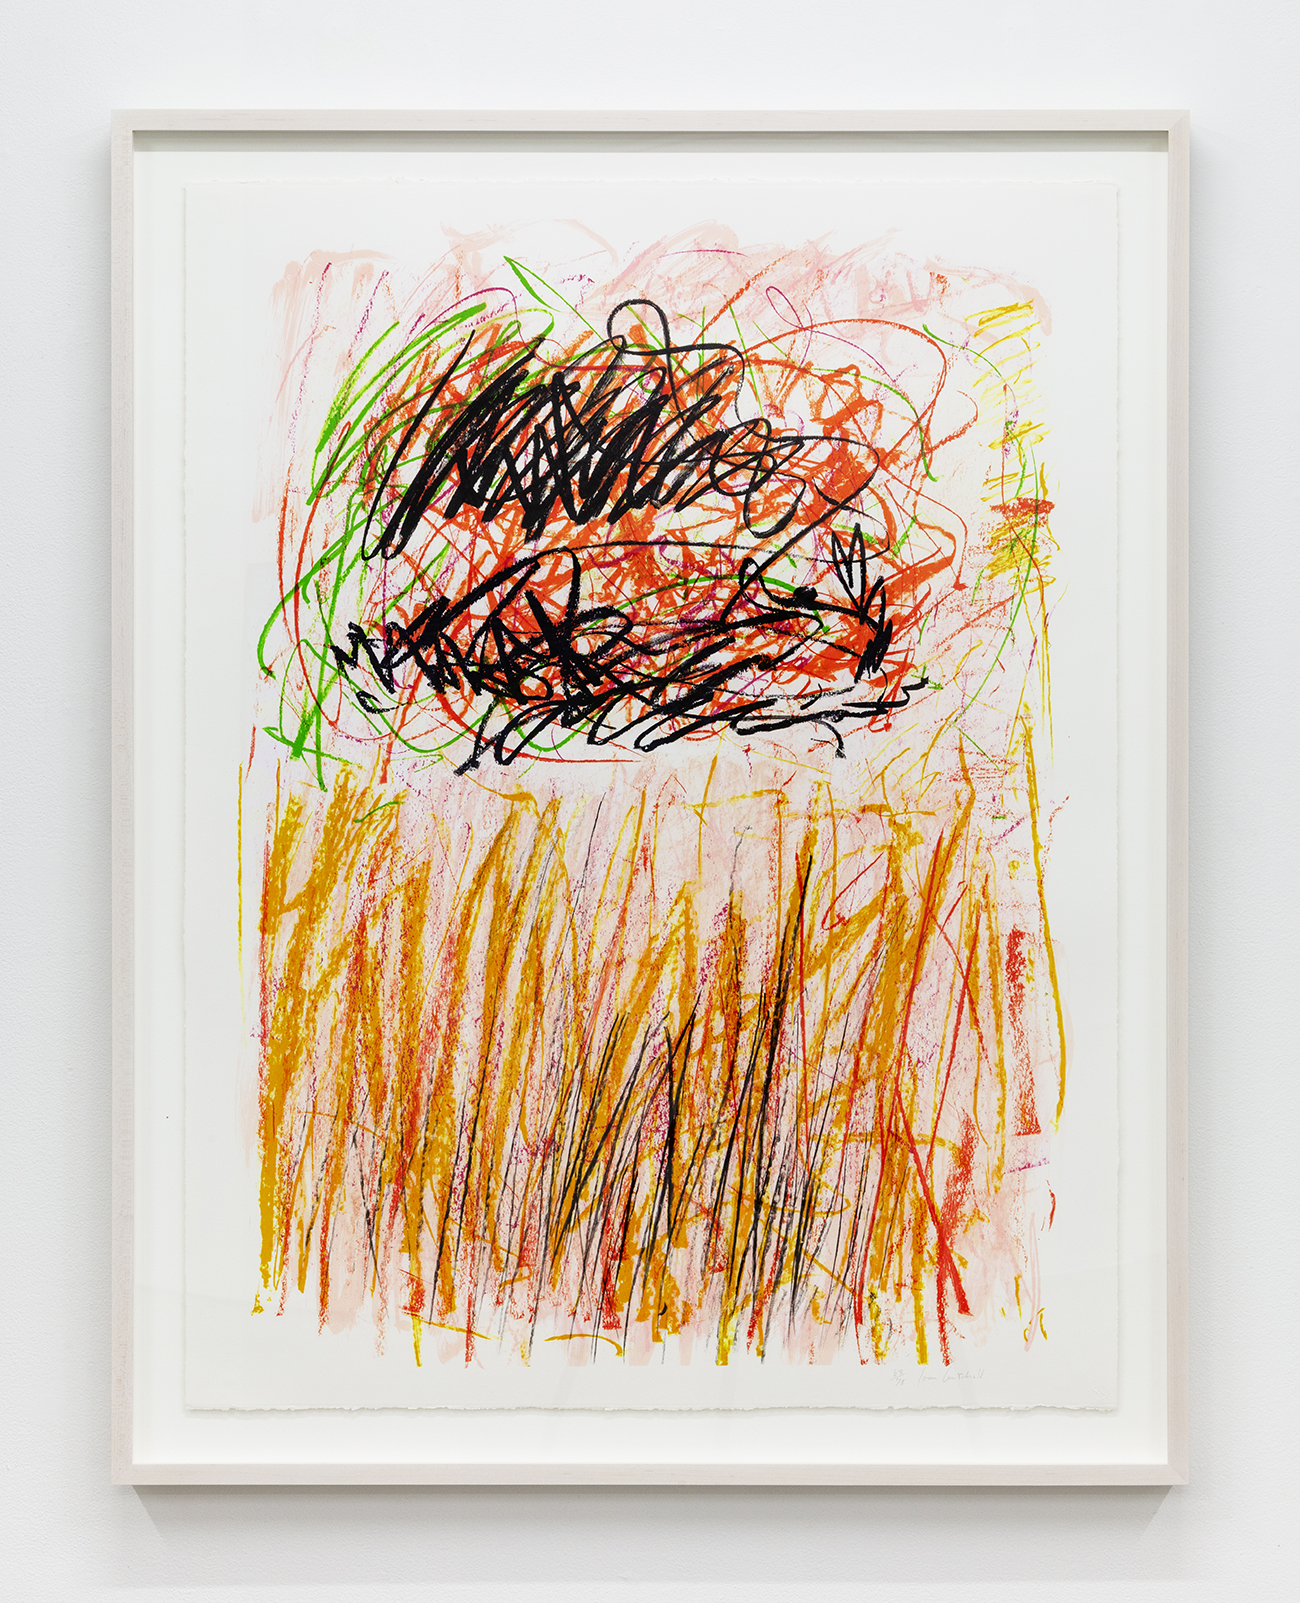 Joan Mitchell Flower III, 1981 Lithograph Image Dimensions: 42 1/2 x 32 1/2 inches (107.95 x 82.55 cm) Paper Size: 42 1/2 x 32 1/2